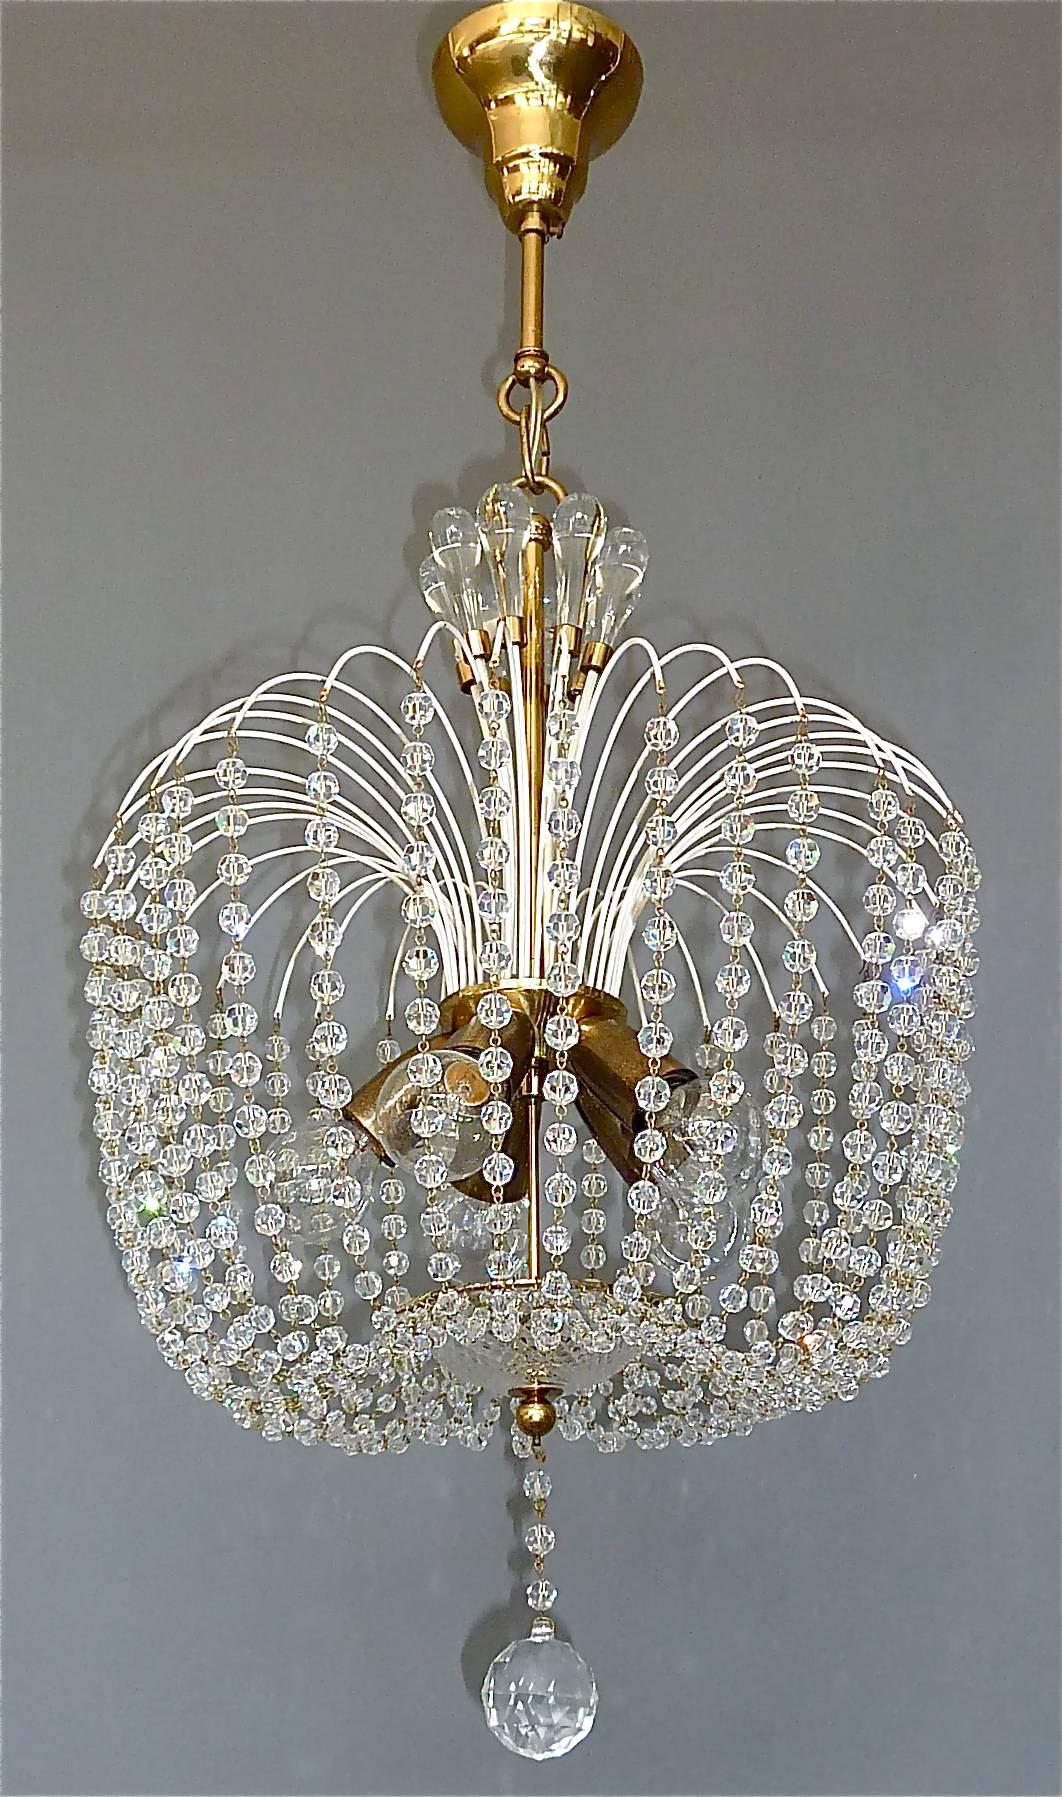 Fantastic midcentury sparkling crystal glass and patinated brass, white sputnik chandelier with attribution to J.L Lobmeyr or Emil Stejnar for Rupert Nikoll, Austria, circa 1955s. The pendant lamp has high lead and hand-cut faceted crystal glass